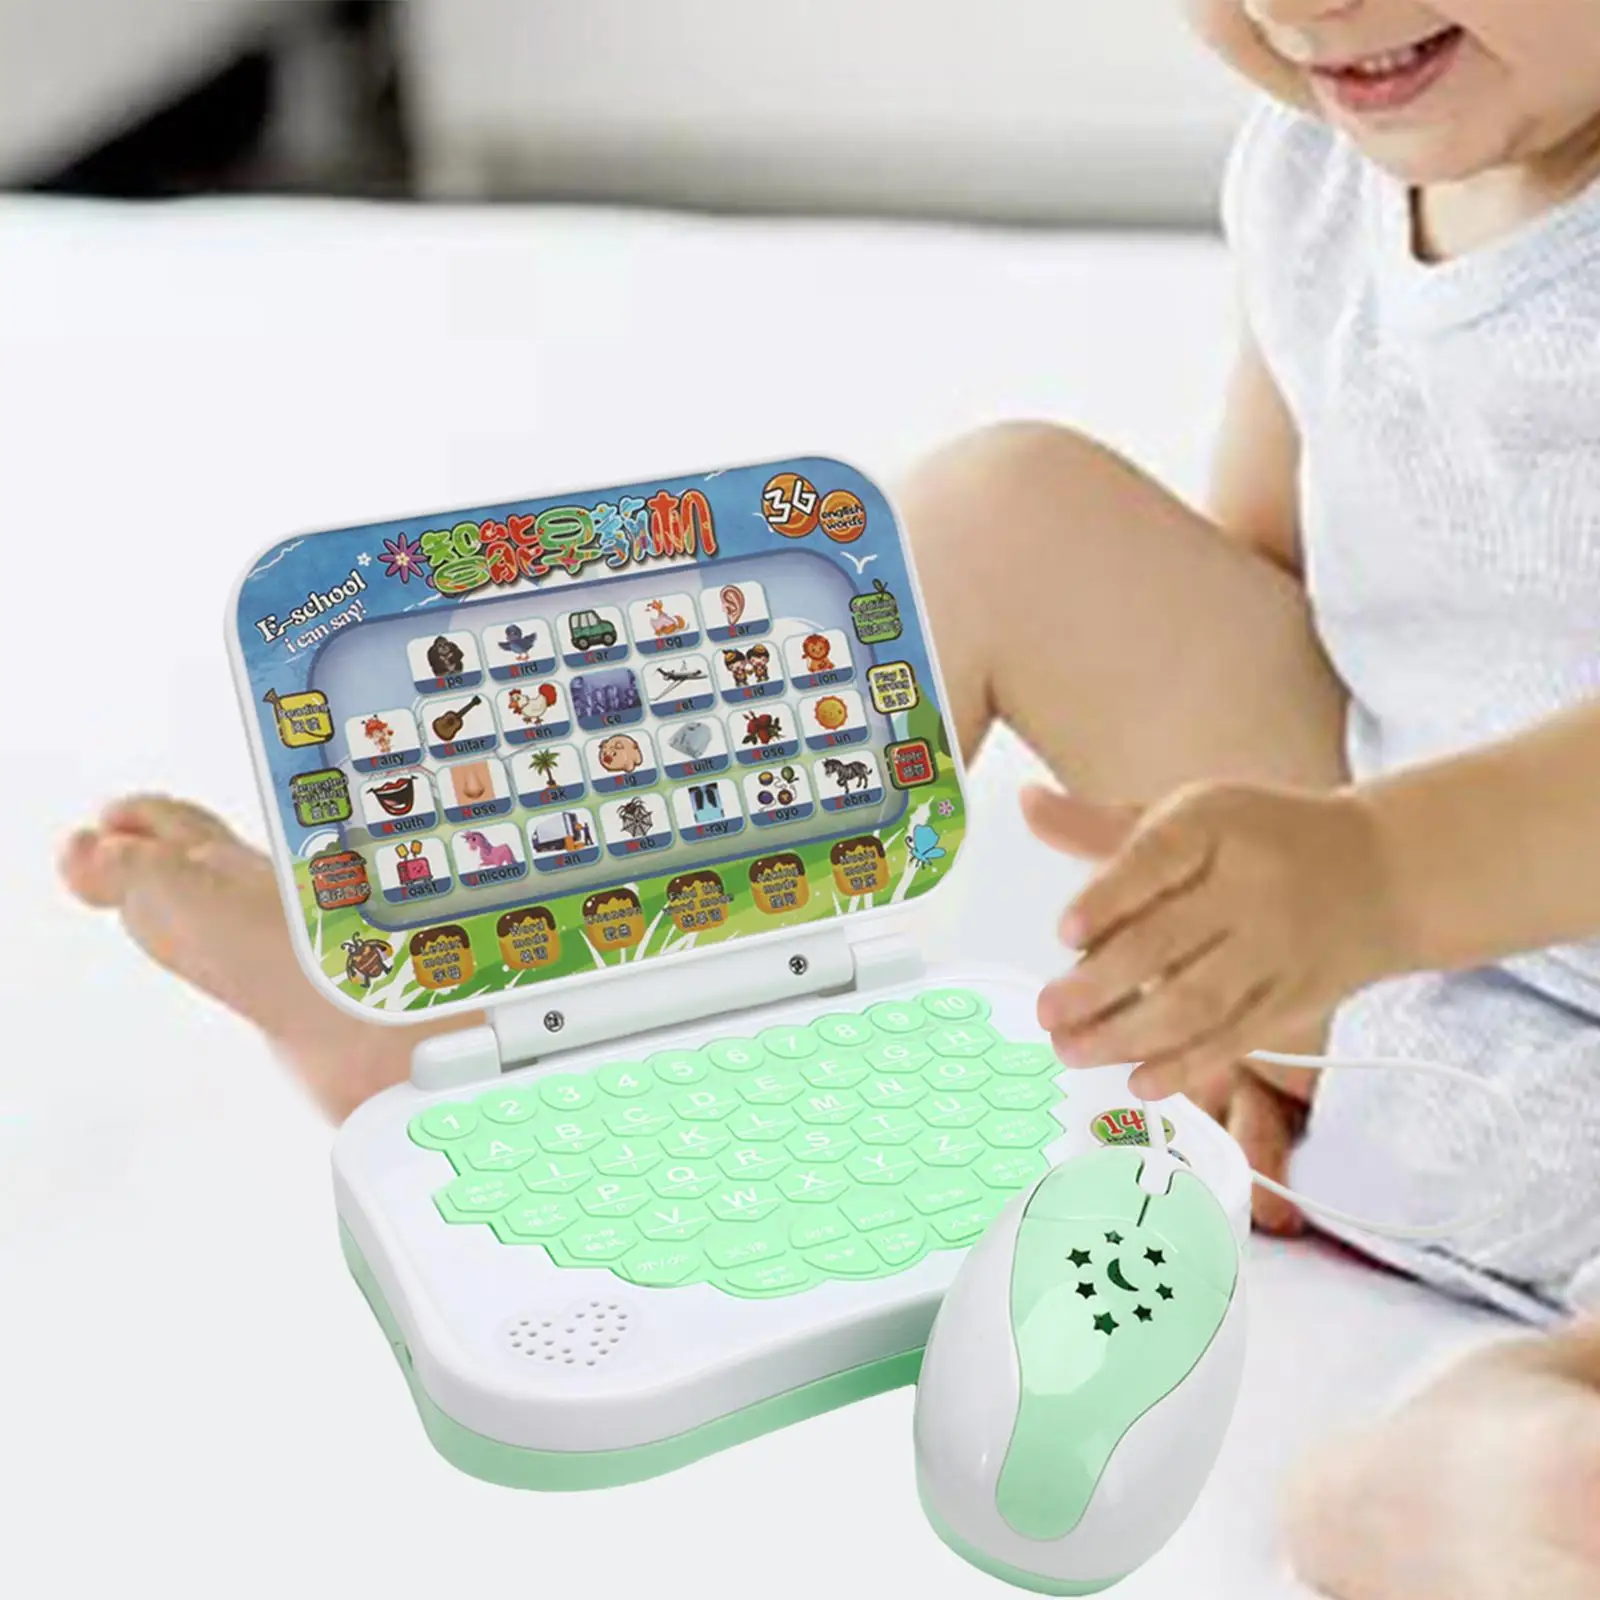 Handheld Language Learning Machine Activities Early Education Study Game Kids Laptop Toy for Kids Girls Boys Bithday Gifts